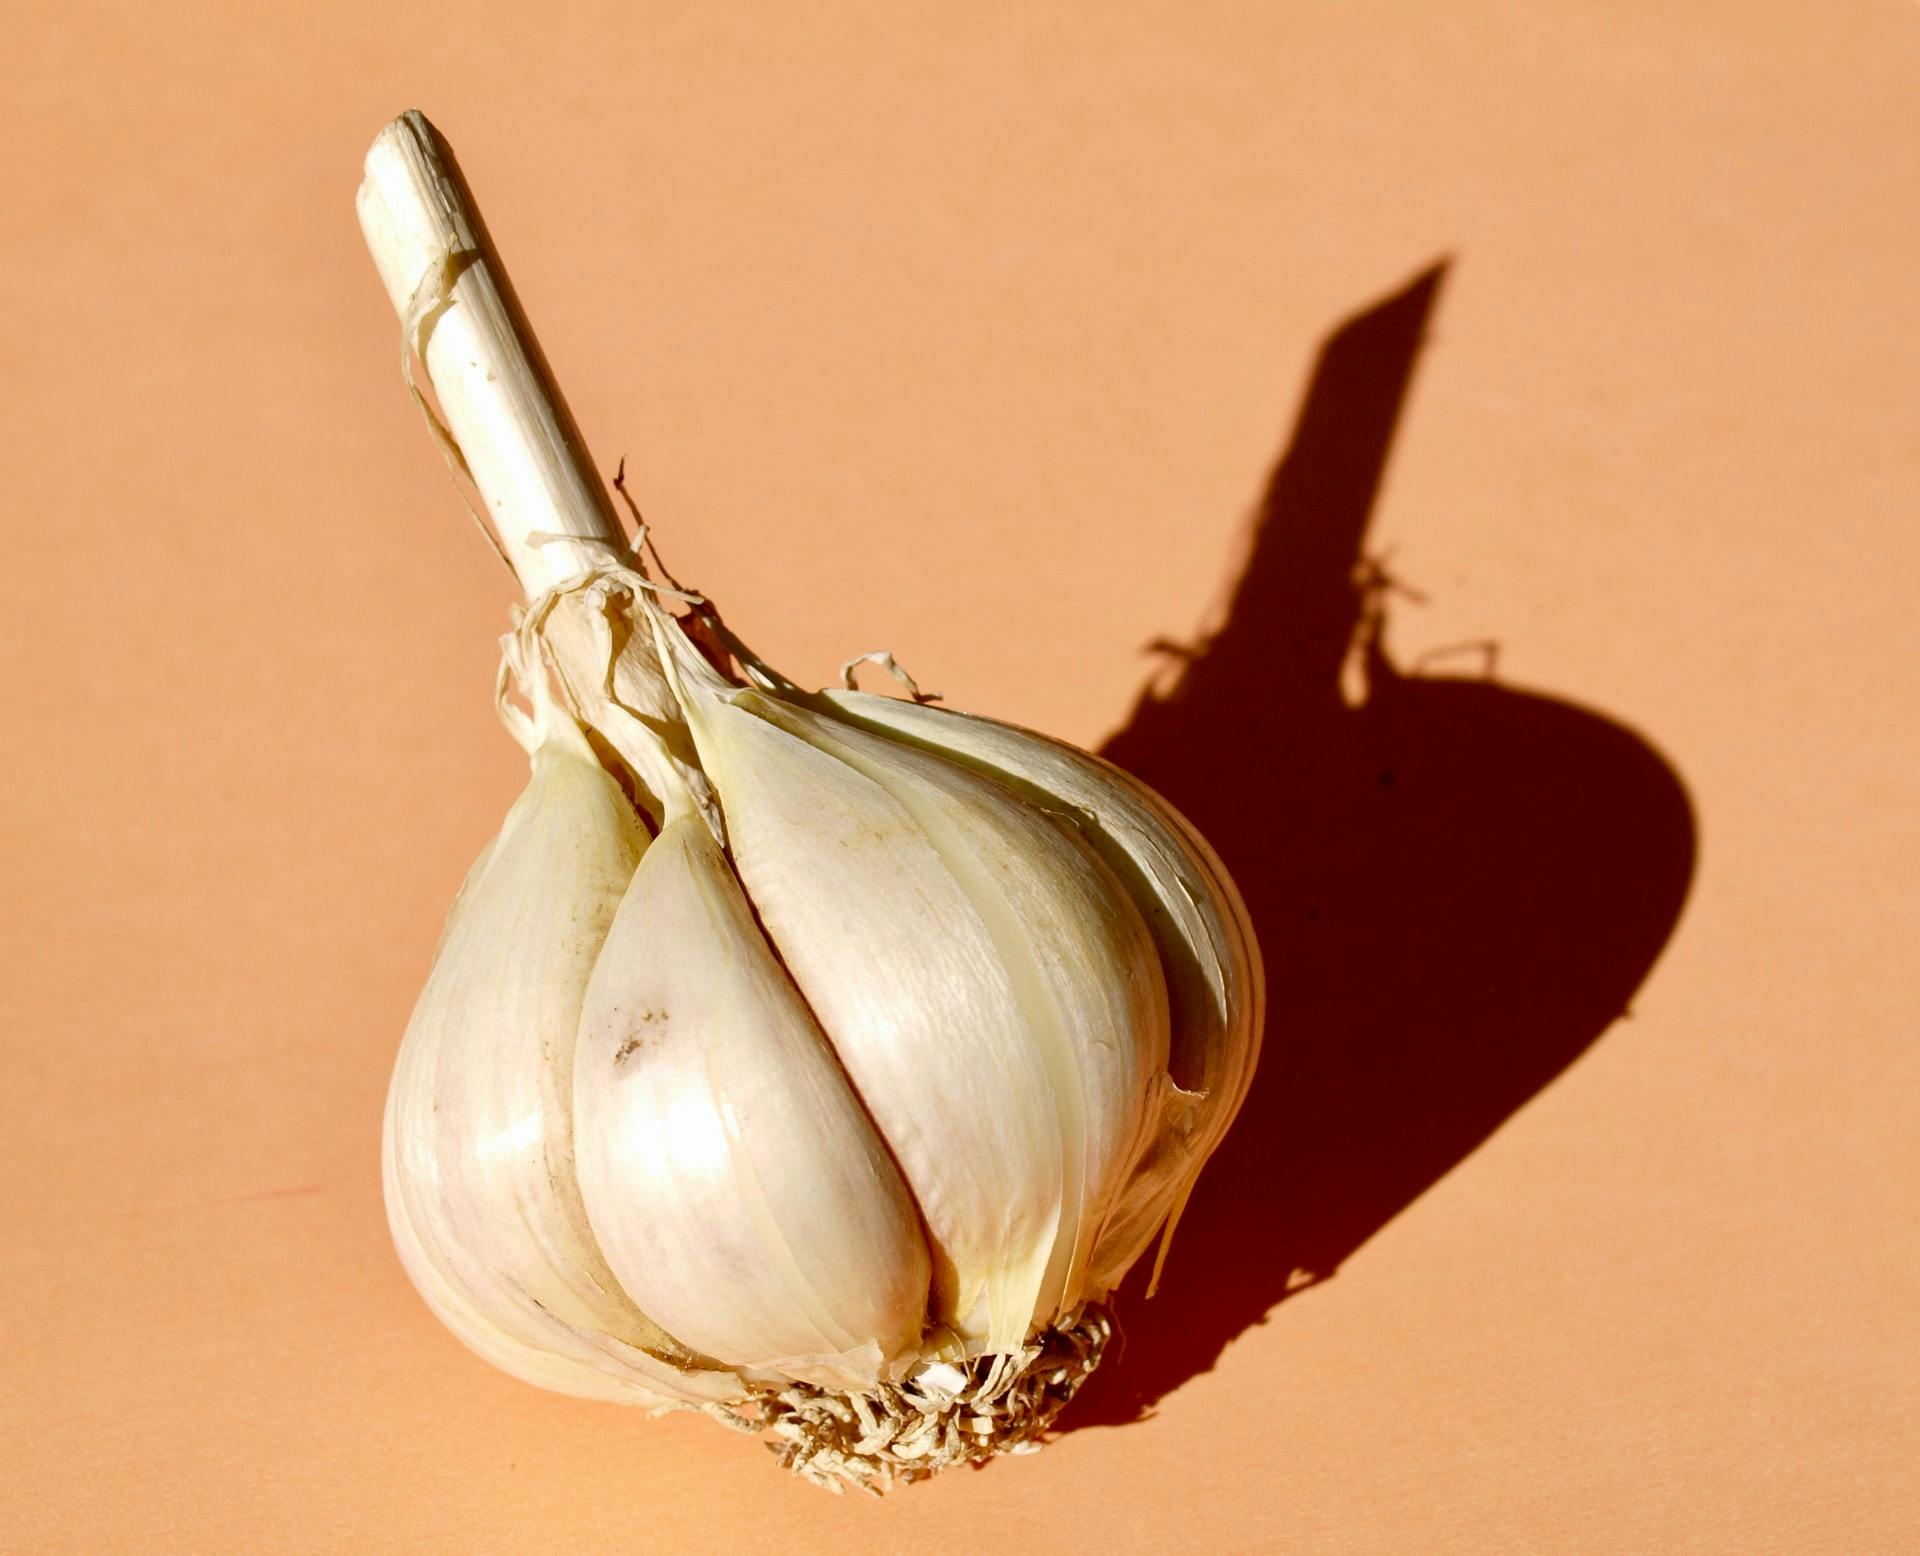 Garlic Powder: How Much Equals One Clove, and More